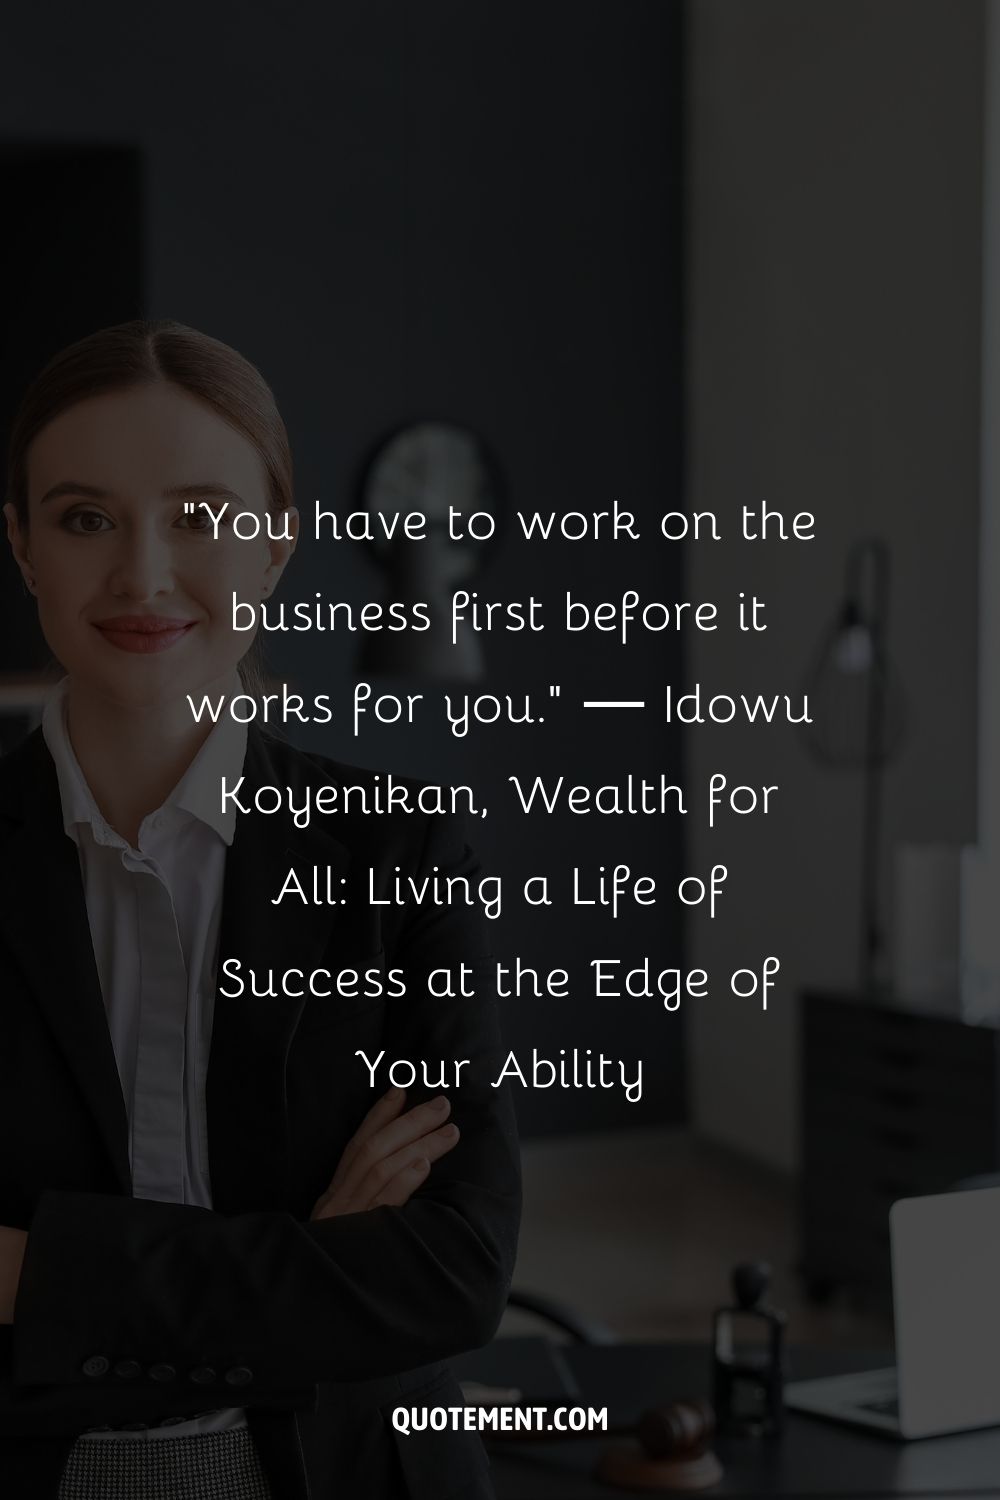 “You have to work on the business first before it works for you.” ― Idowu Koyenikan, Wealth for All Living a Life of Success at the Edge of Your Ability